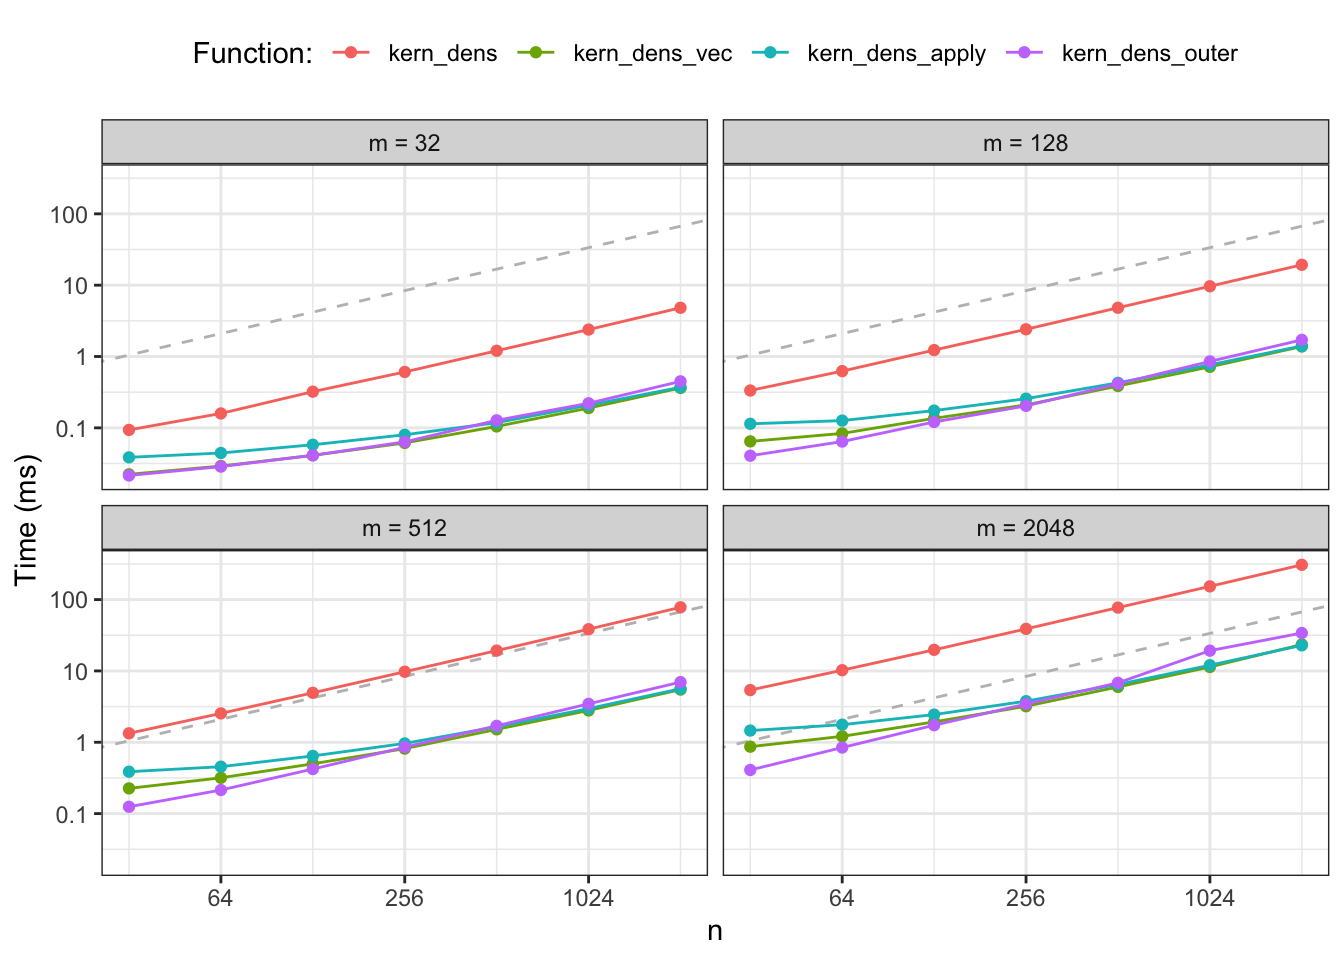 Median run times for the four different implementations of kernel density estimation. The dashed gray line is a reference line with slope 1.